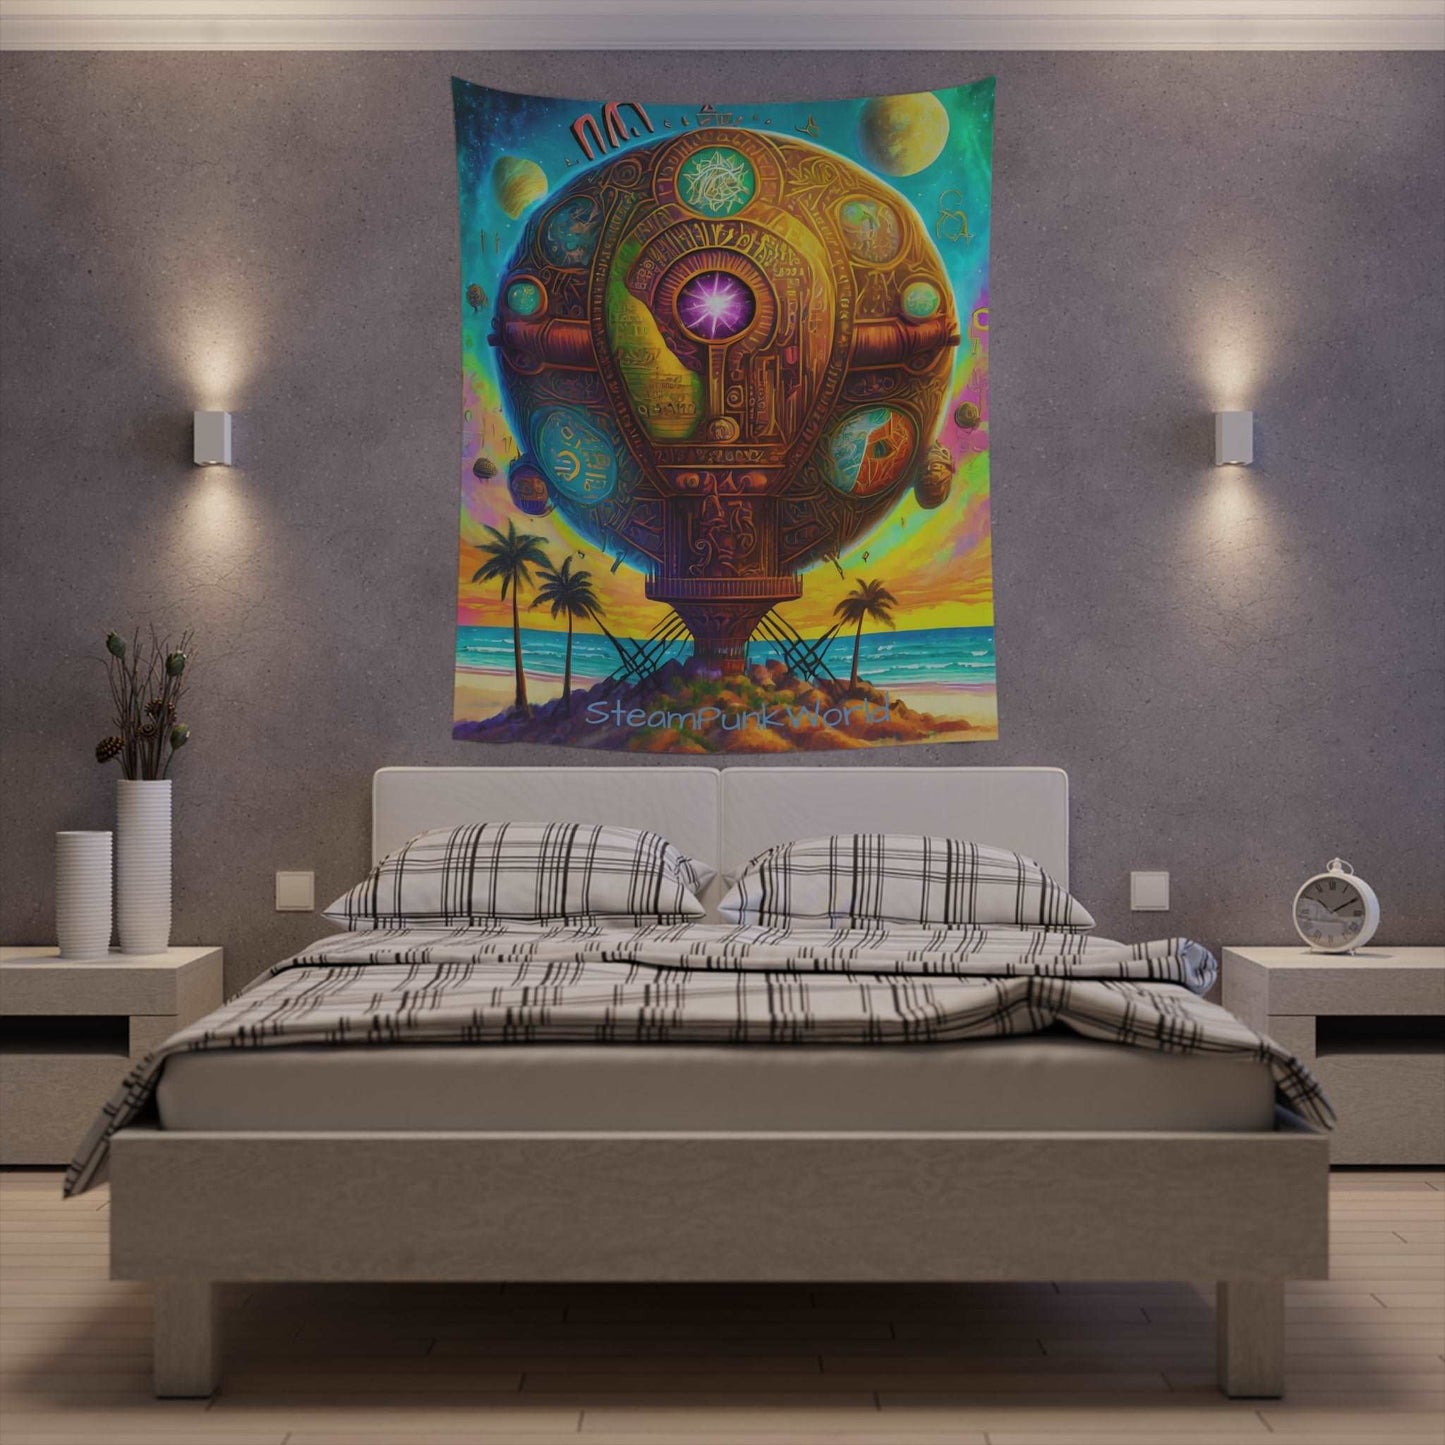 Printed Wall Tapestry Mystical Steam Punk World Miami